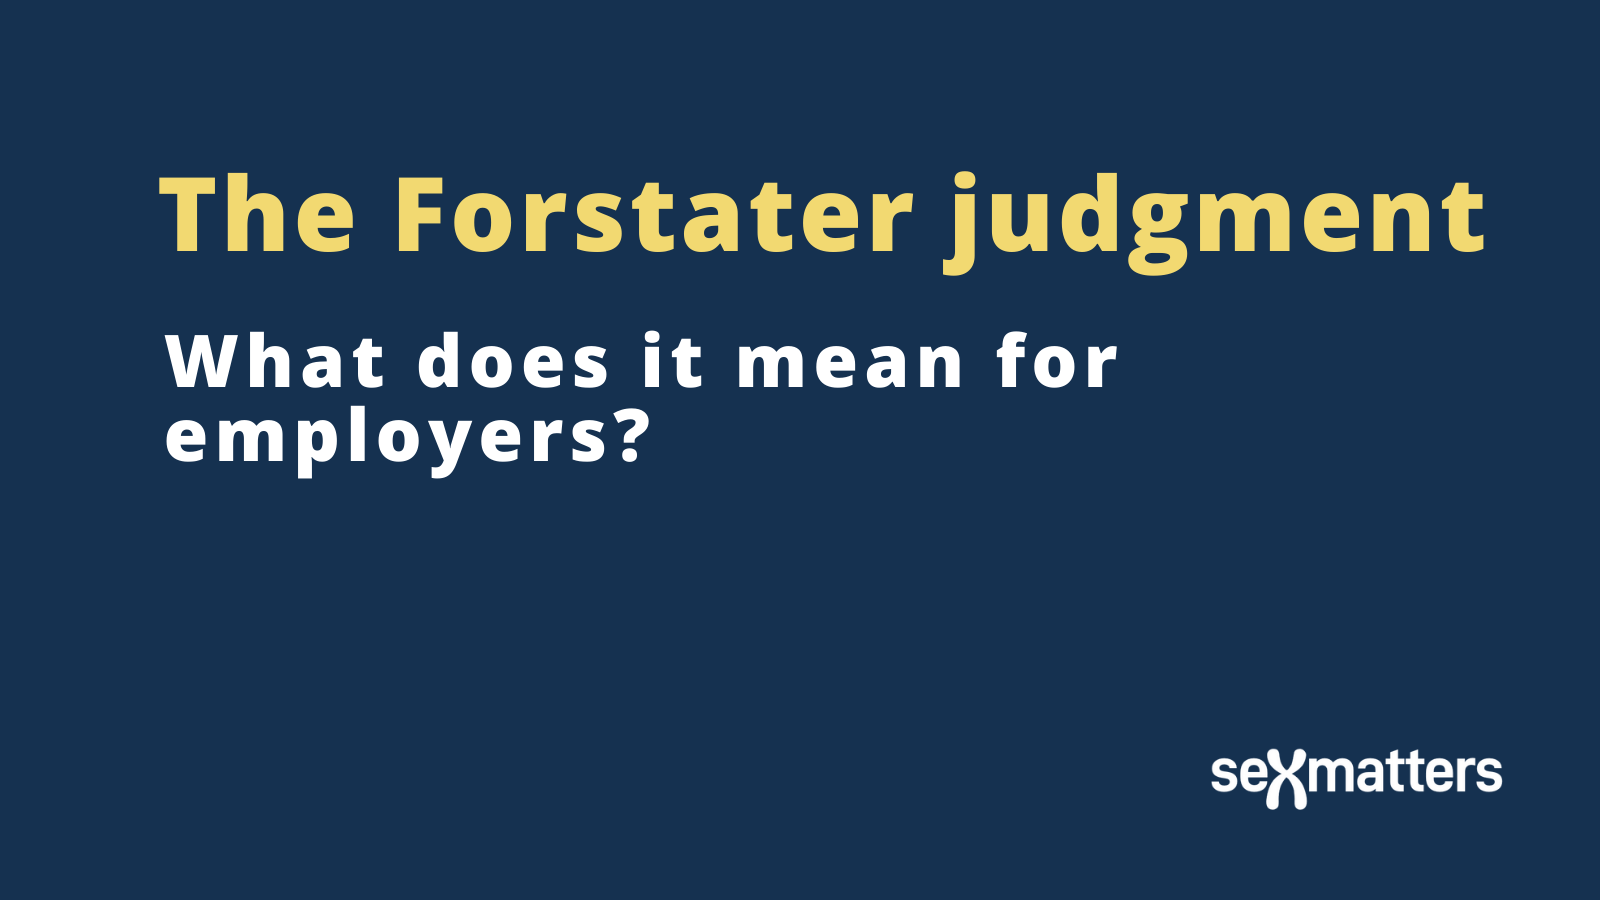 The Forstater judgment – what does it mean for employers?